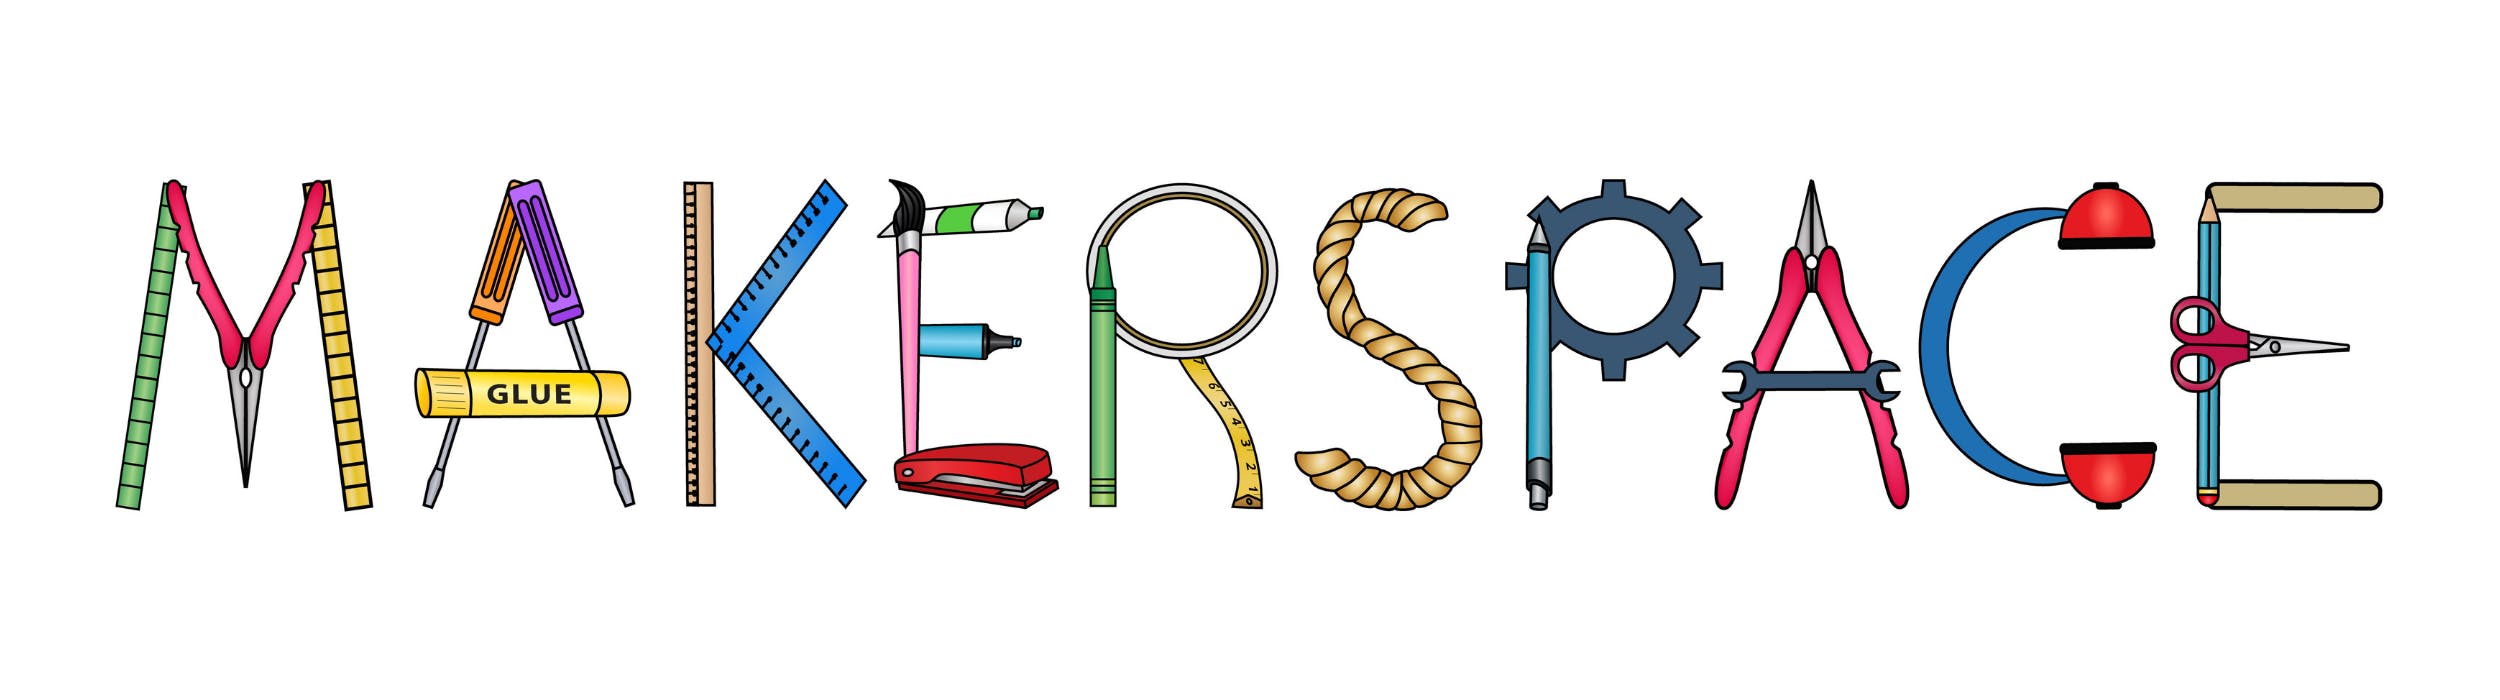 maker; space; letters; learning; teaching; makerspace; steam; colorful; banner; symbol; education; word; poster; sign; design